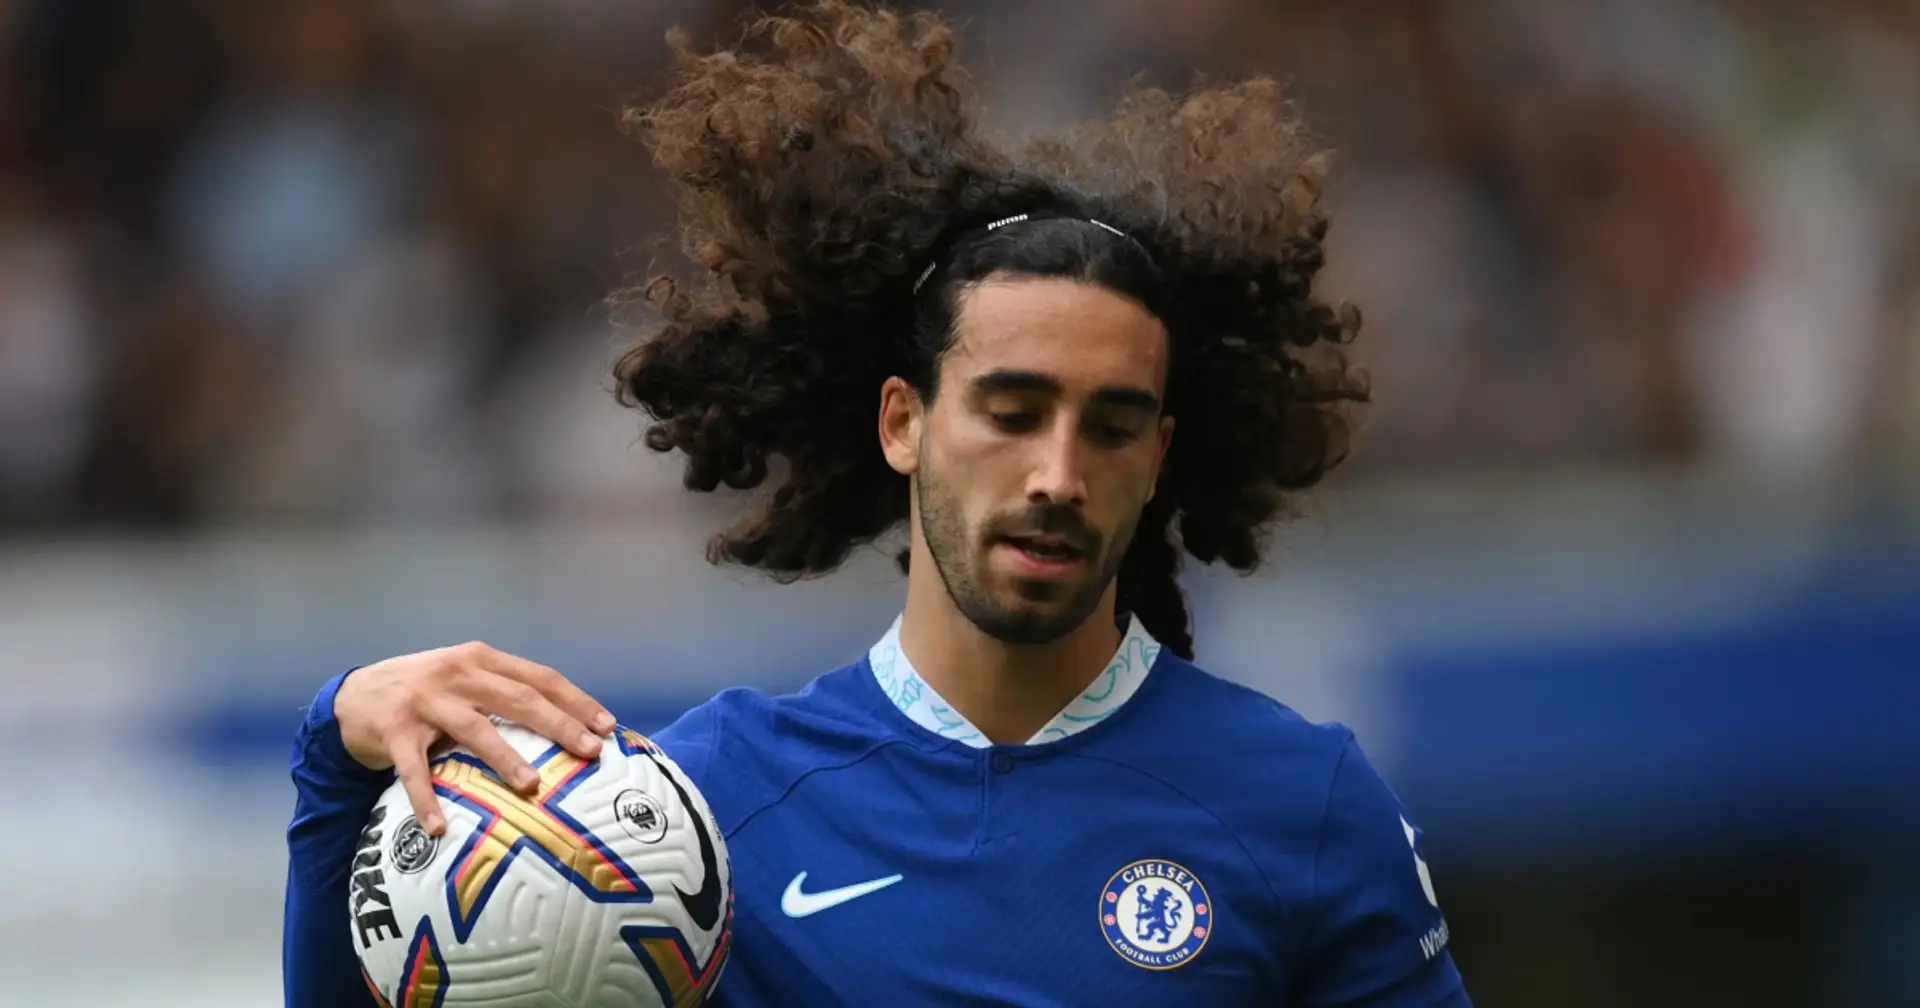 Two full-backs could be 'excluded' from Chelsea squad — one is Cucurella